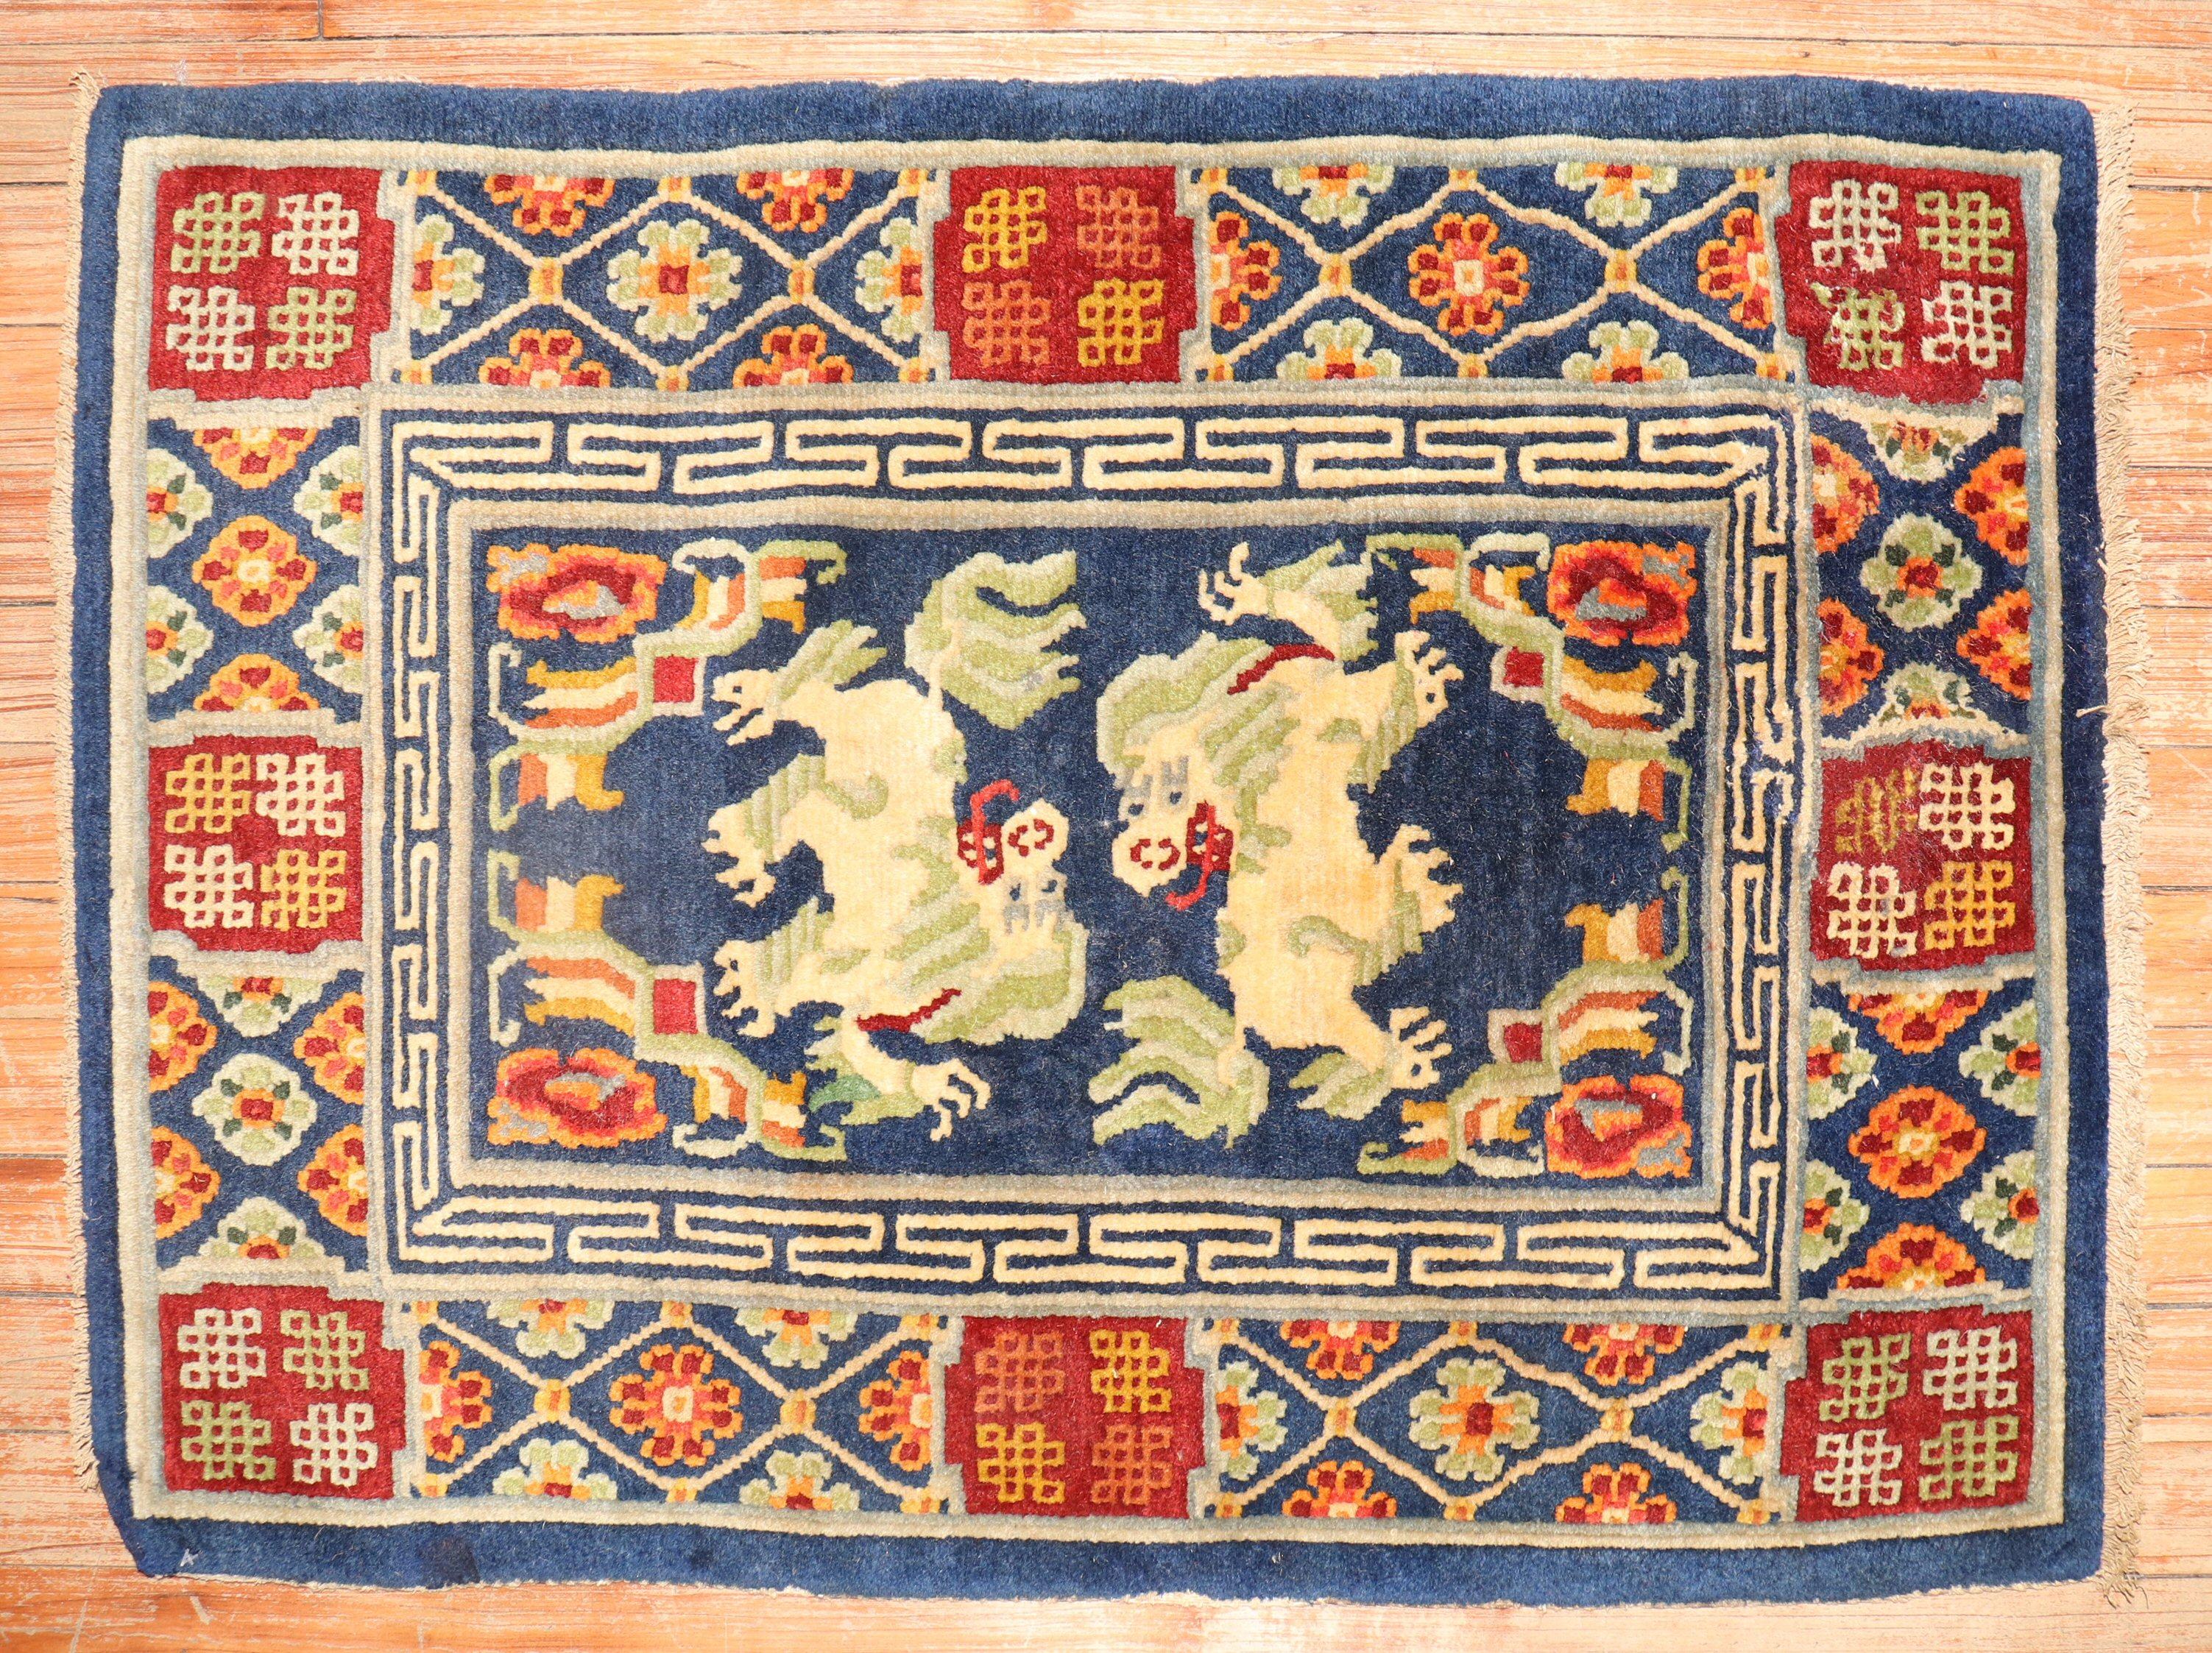 A 3rd quarter of the 20th century Tibetan rug with a dragon motif on a navy field

Size: 2'1'' x 2'11''.

.